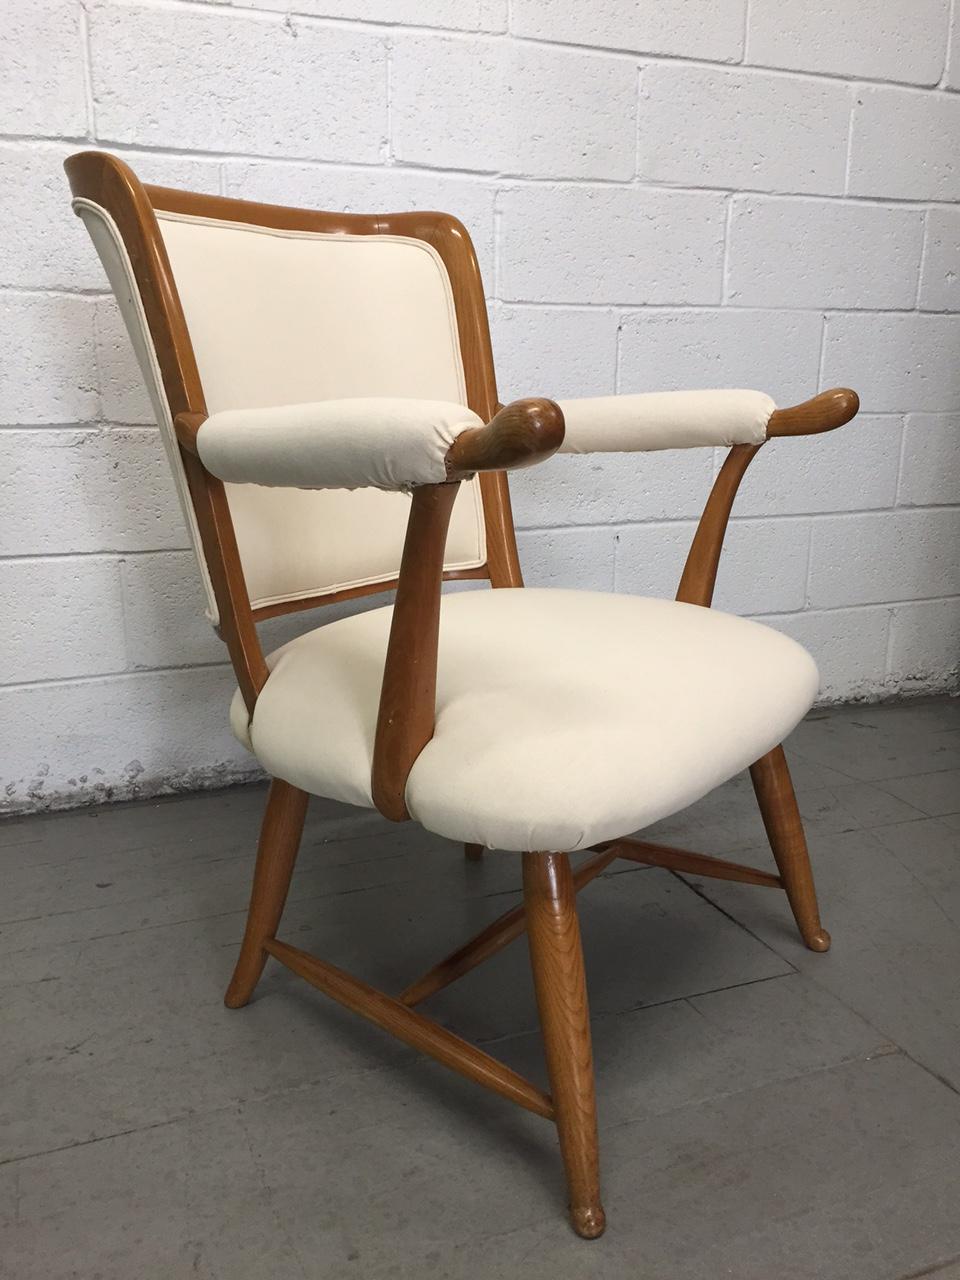 Pair of 1950s French country armchairs. Has an oak frame with a linen-blend upholstered fabric.